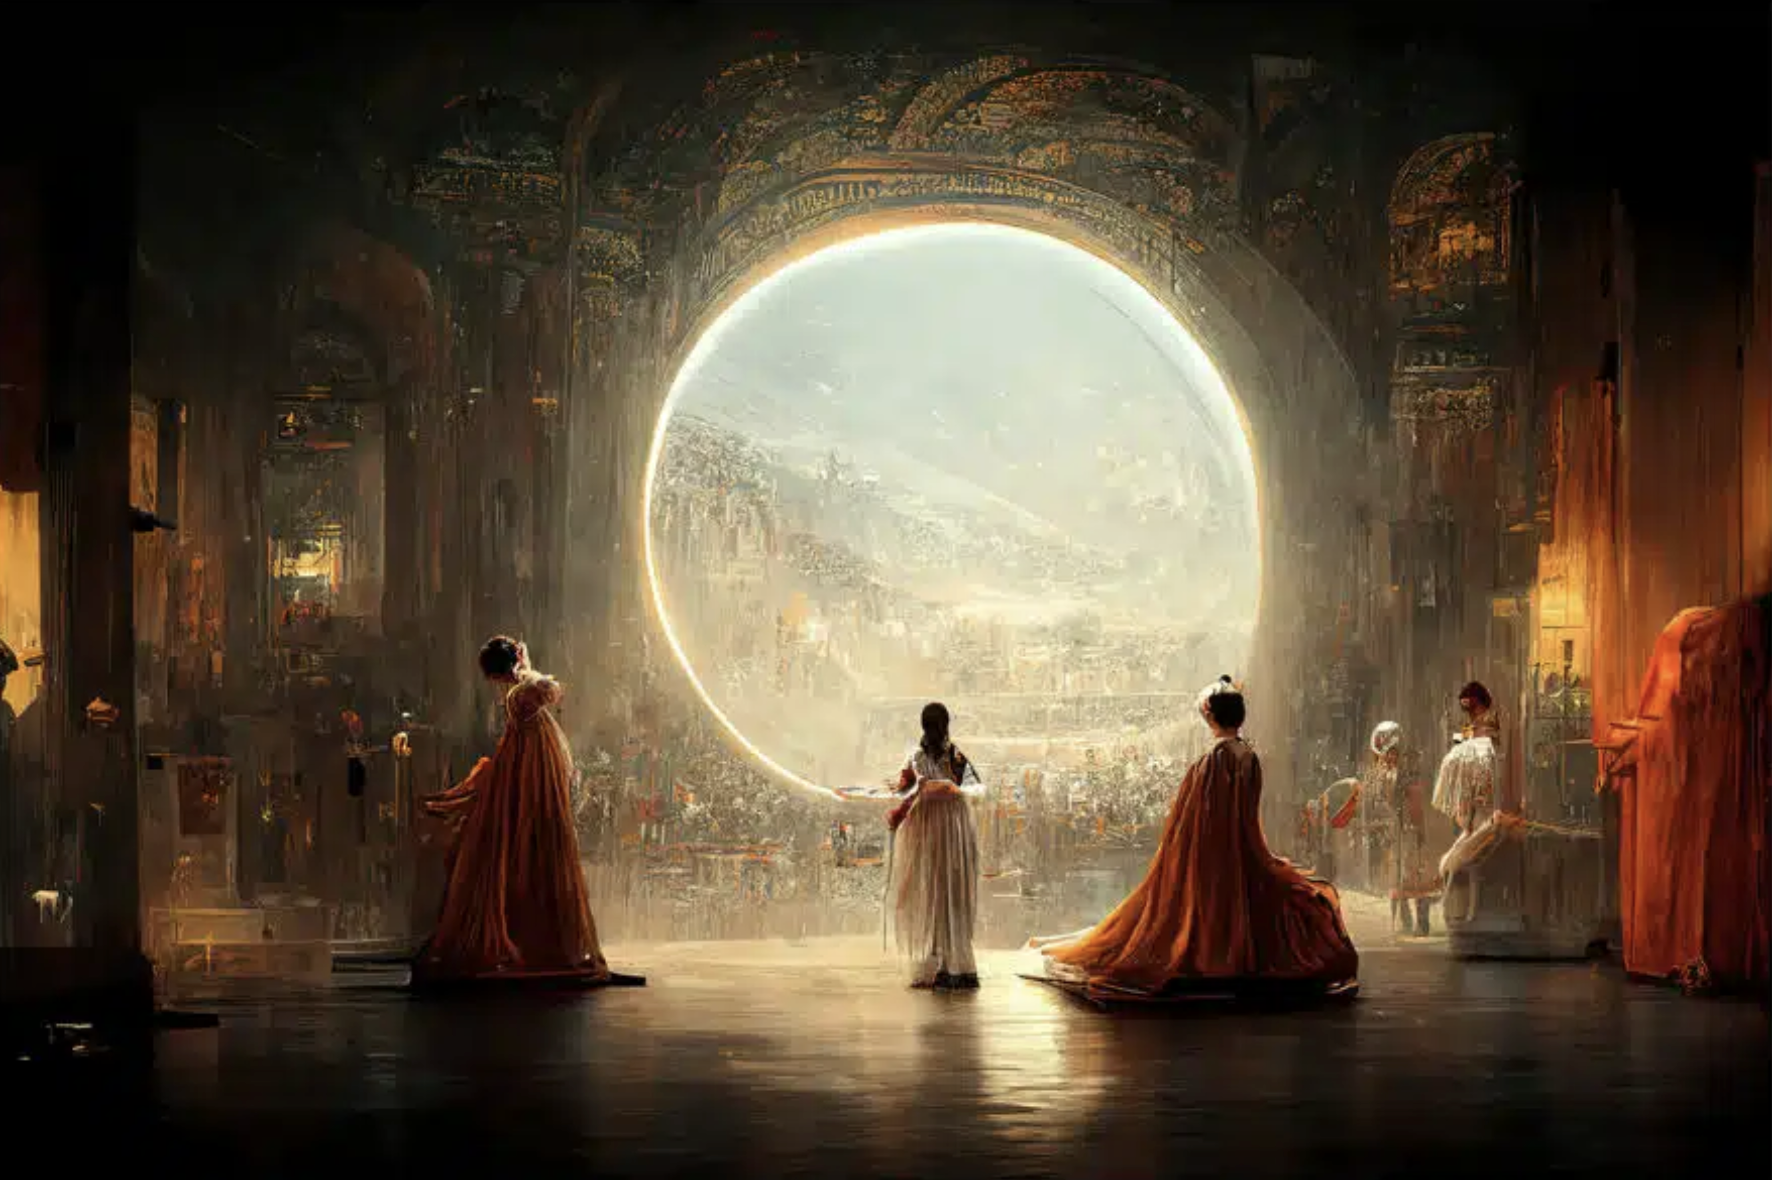 Fantasy illustration generated by artificial intelligence. Image of three humans with shiny, fantastical space helmets, in flowing Renaissance-like robes in red and white placed in a sumptuous, cavernous gathering chamber, looking out a large, circular window on an indistinct mountain with dwellings.